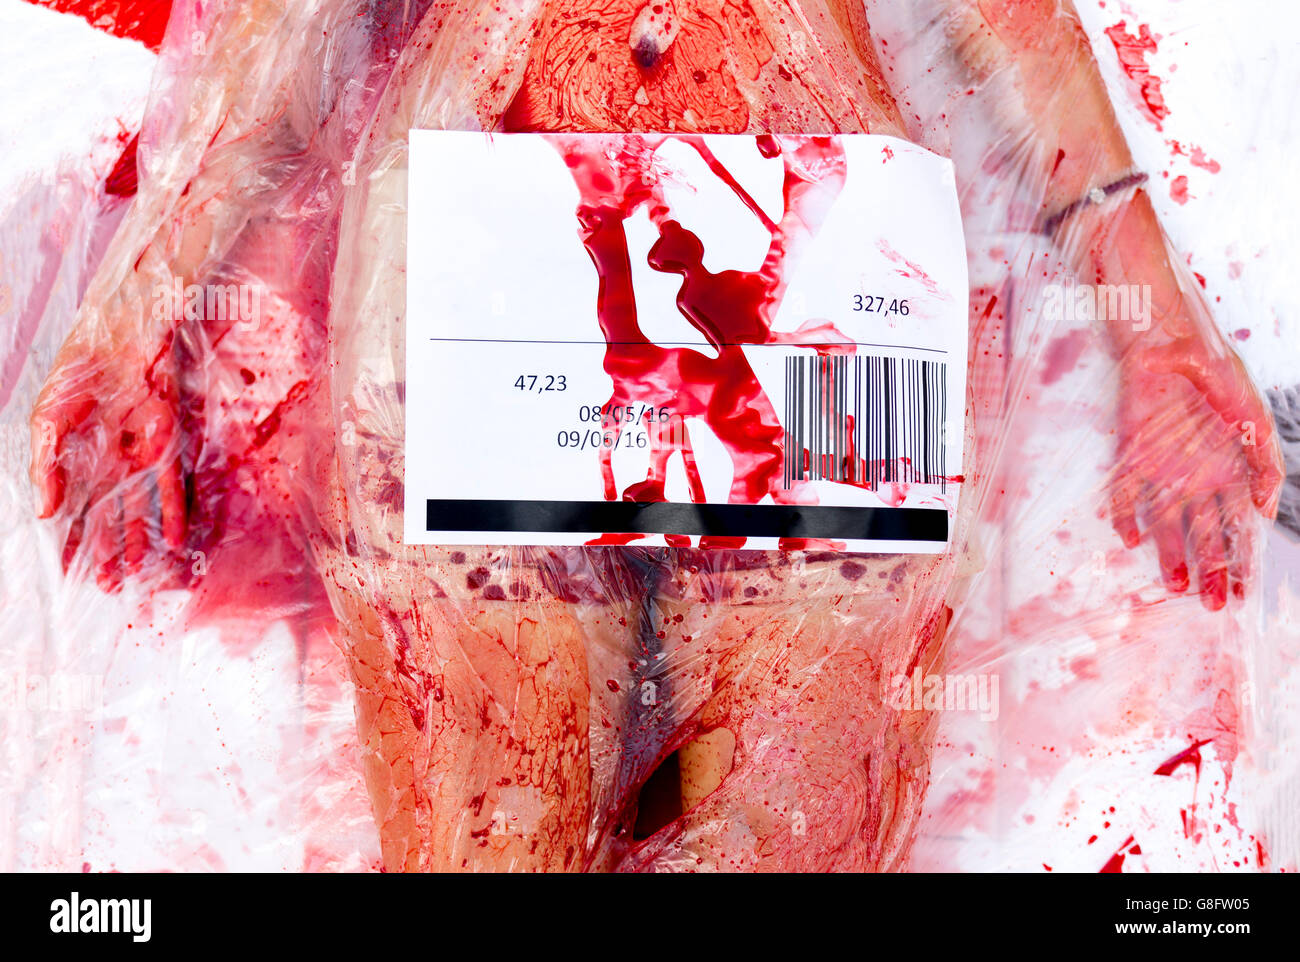 Vegans and vegetarians animal rights activists covered themselves in blood and wrapped themselves in meat packaging protesting a Stock Photo